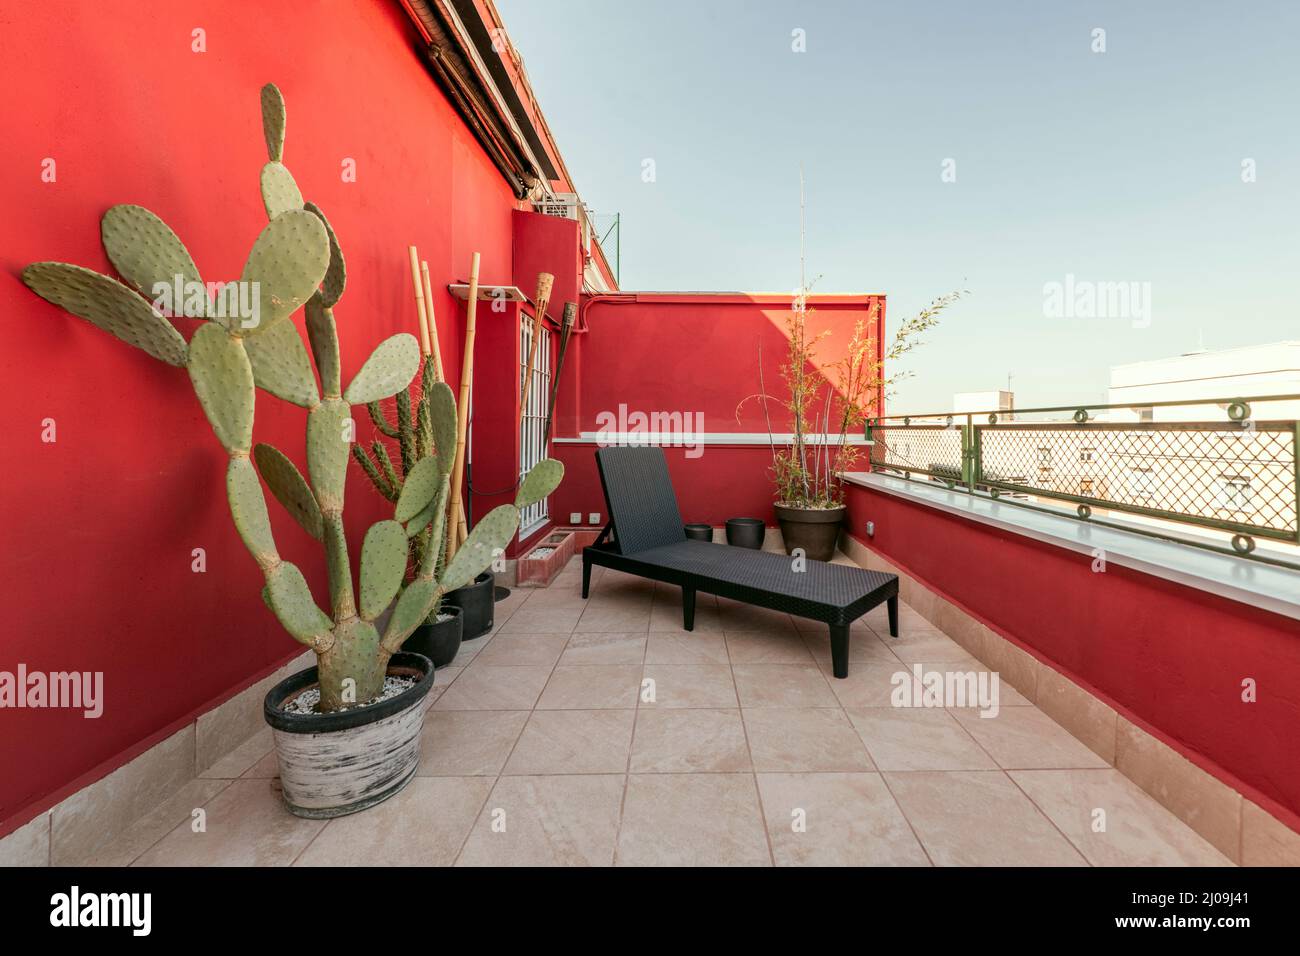 urban terrace of a penthouse residential house with plants and rattan furniture Stock Photo